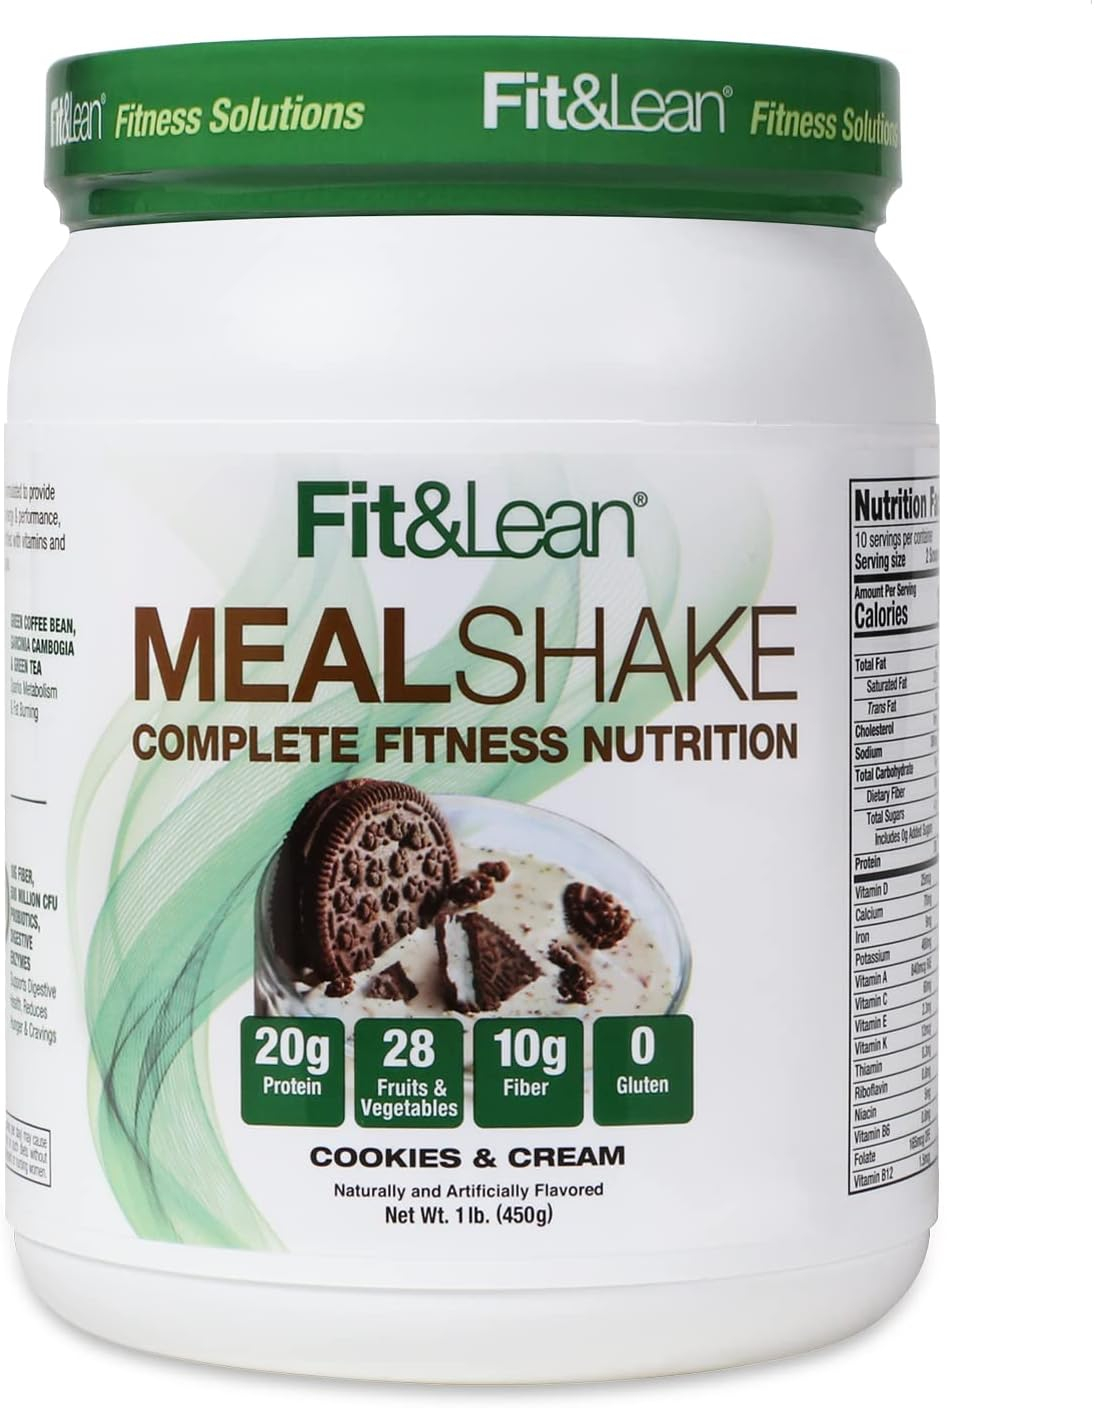 Fit  Lean Meal Shake, Fat Burning Meal Replacement, Meal Replacement with Protein, Fiber, Probiotics and Organic Fruits  Vegetables, Cookies and Cream, 1lb, 10 Servings Per Container